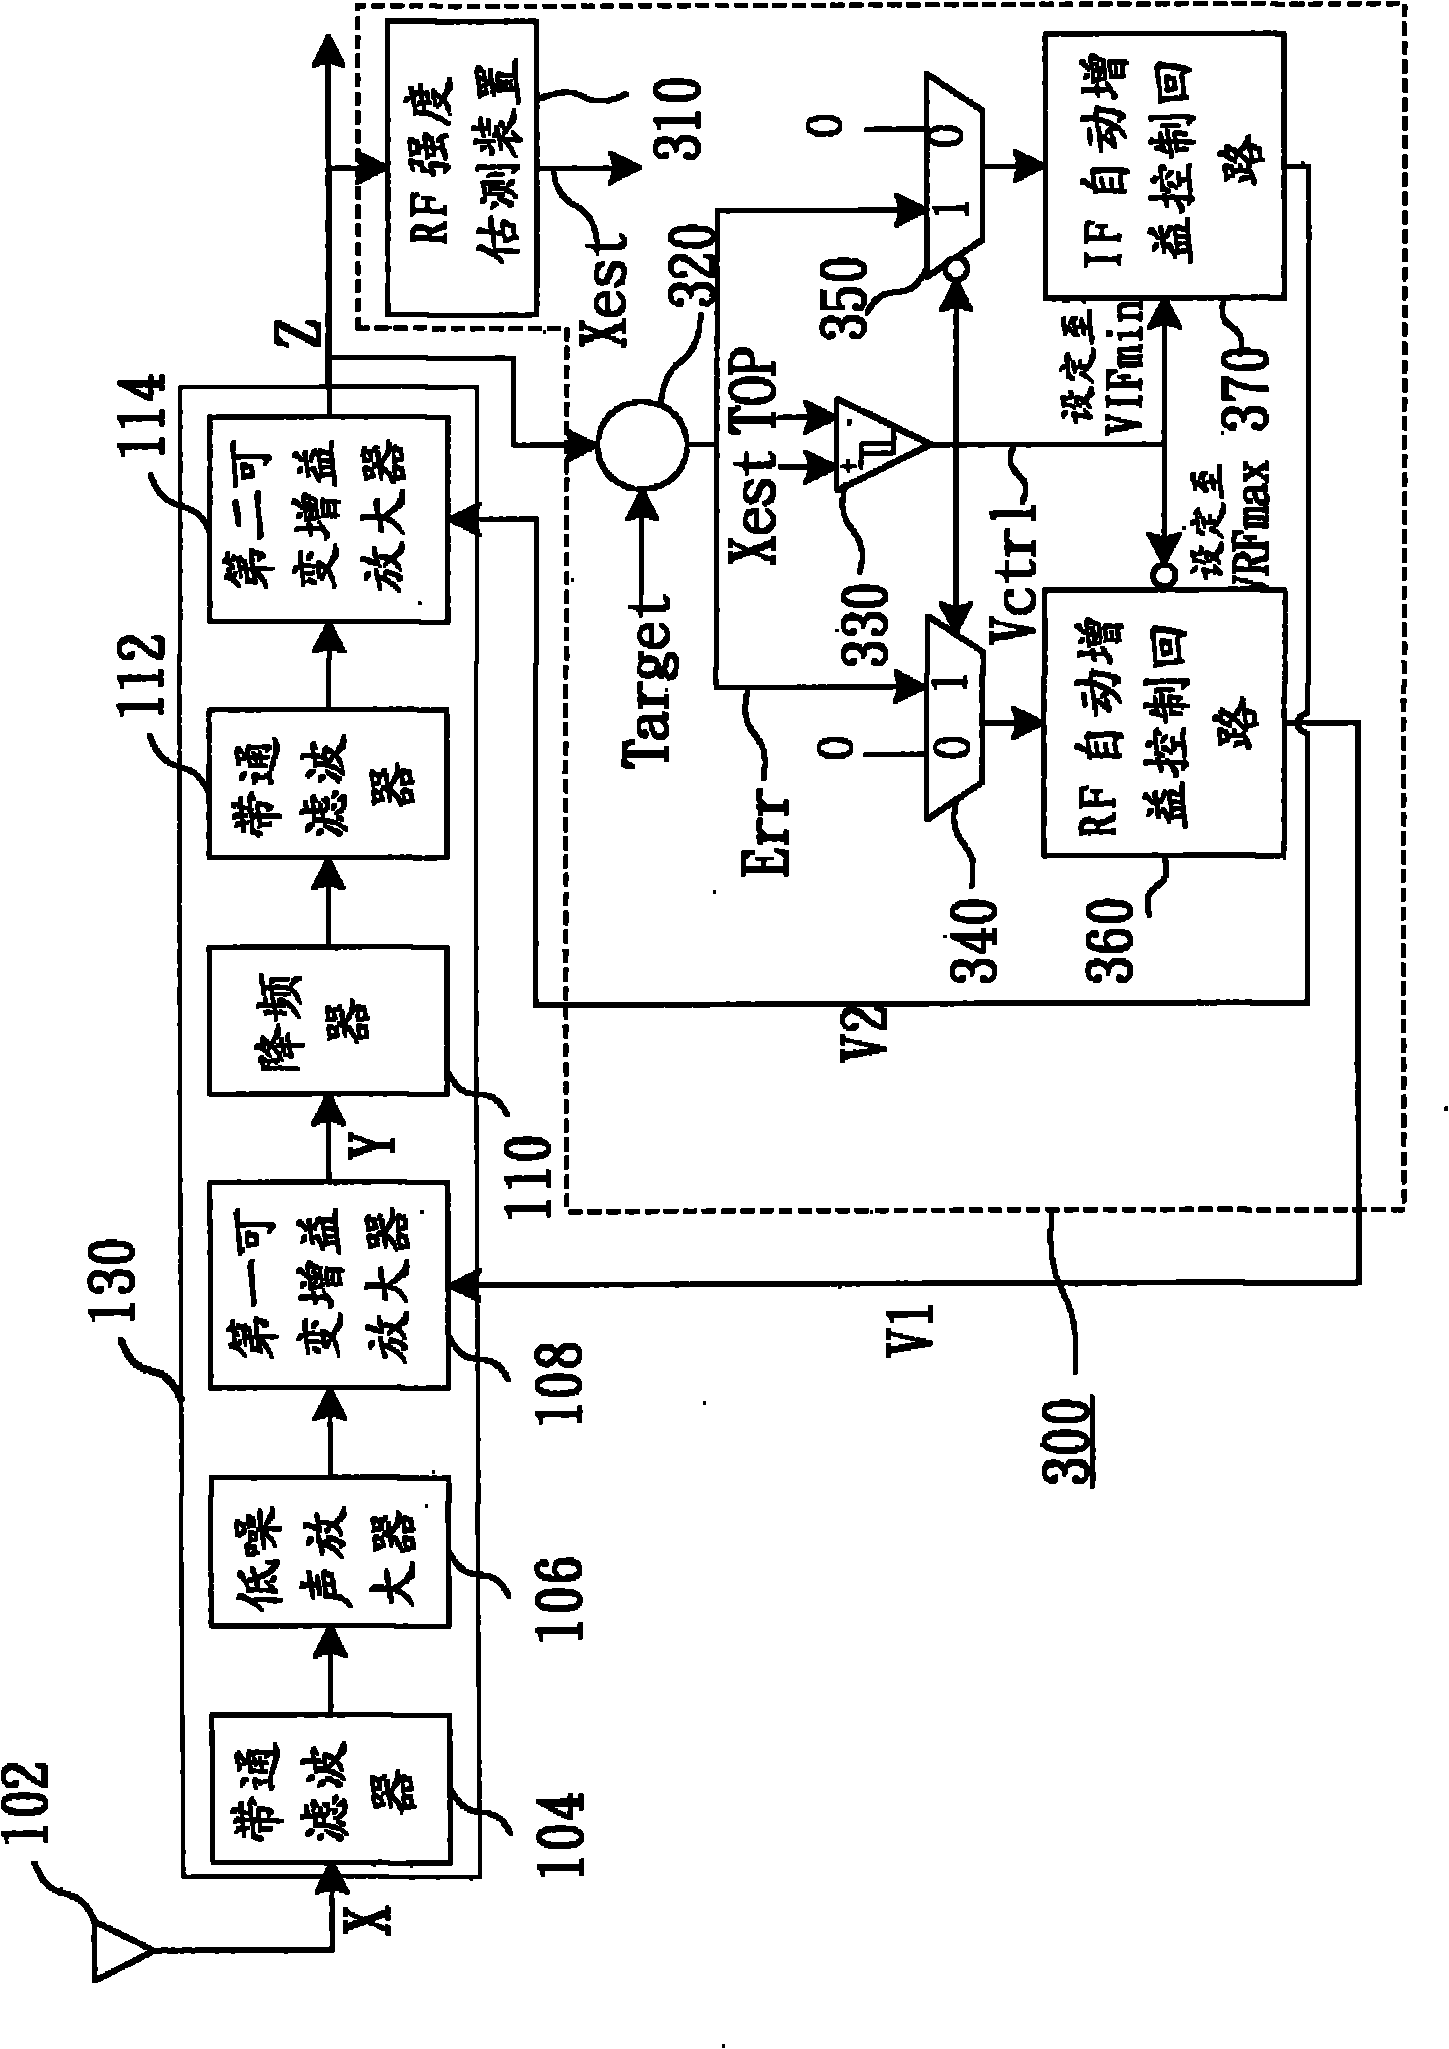 Automatic gain control system having hysteresis switching